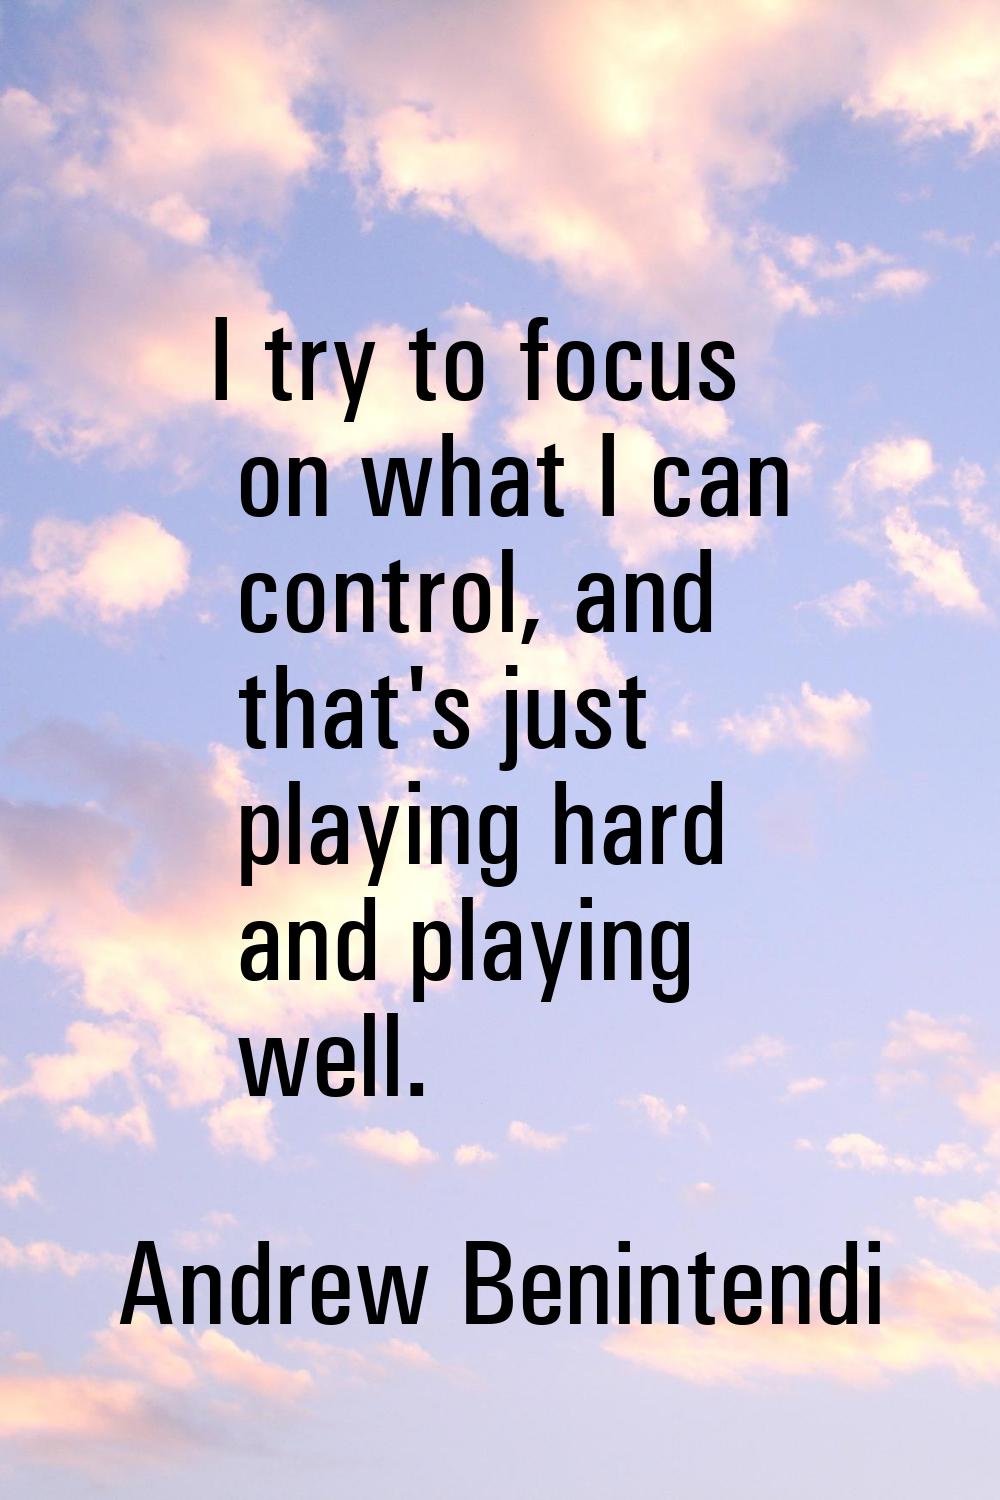 I try to focus on what I can control, and that's just playing hard and playing well.